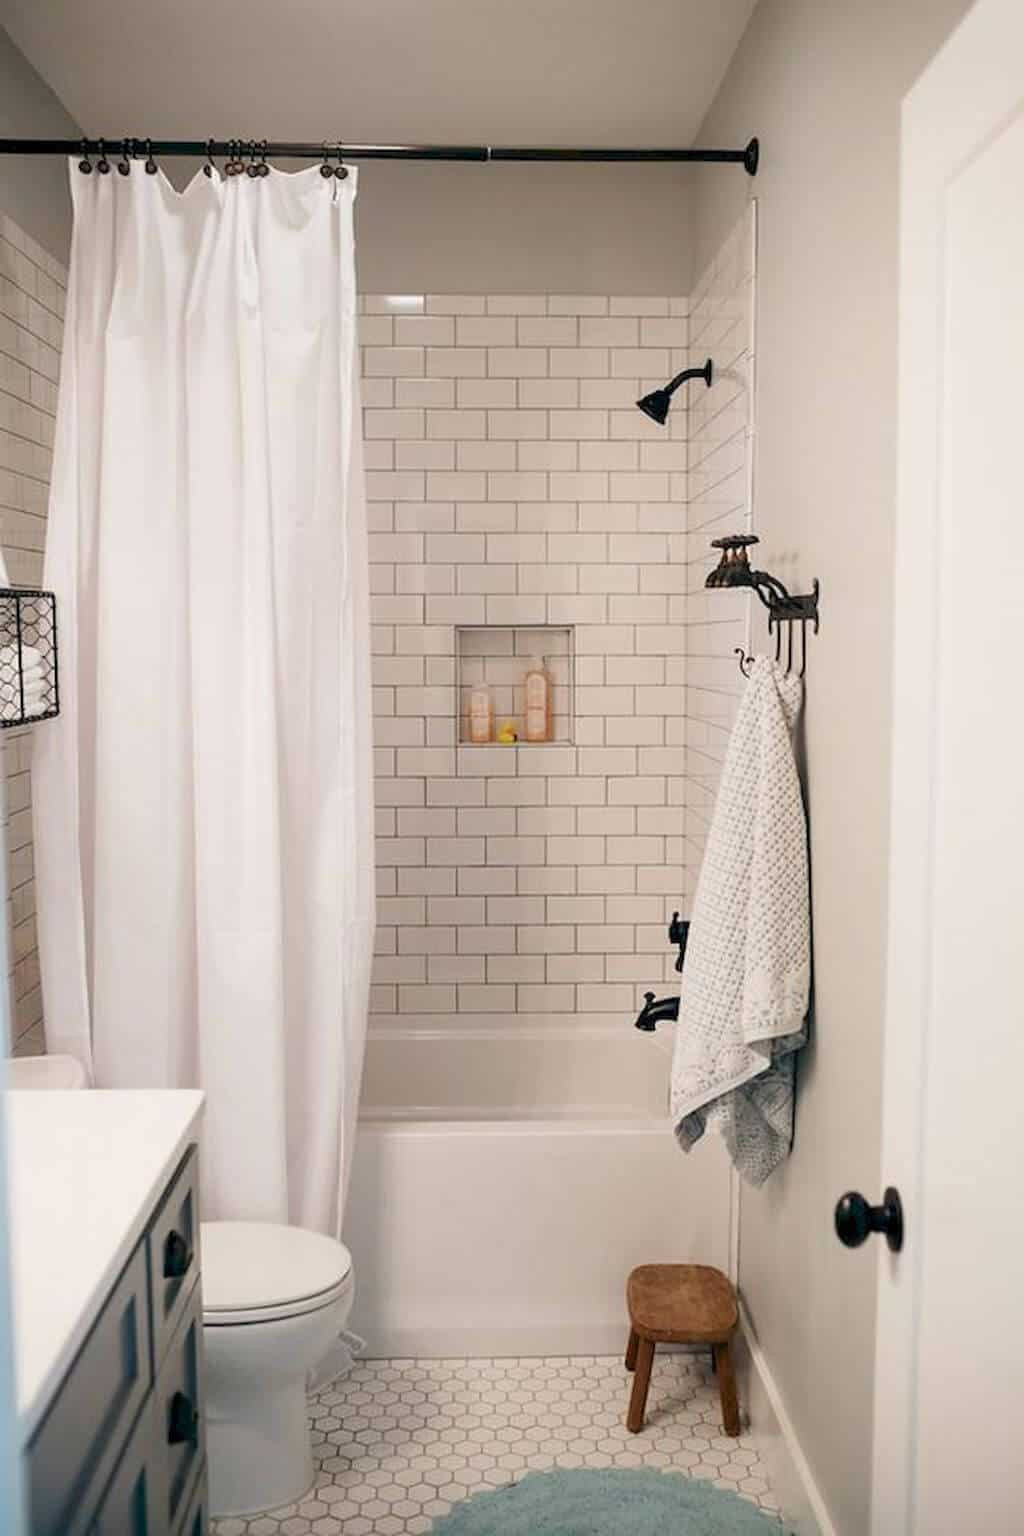 Bathroom Ideas For Small Spaces
 32 Ideas of Bathroom Remodels for Small Spaces You’ll Want